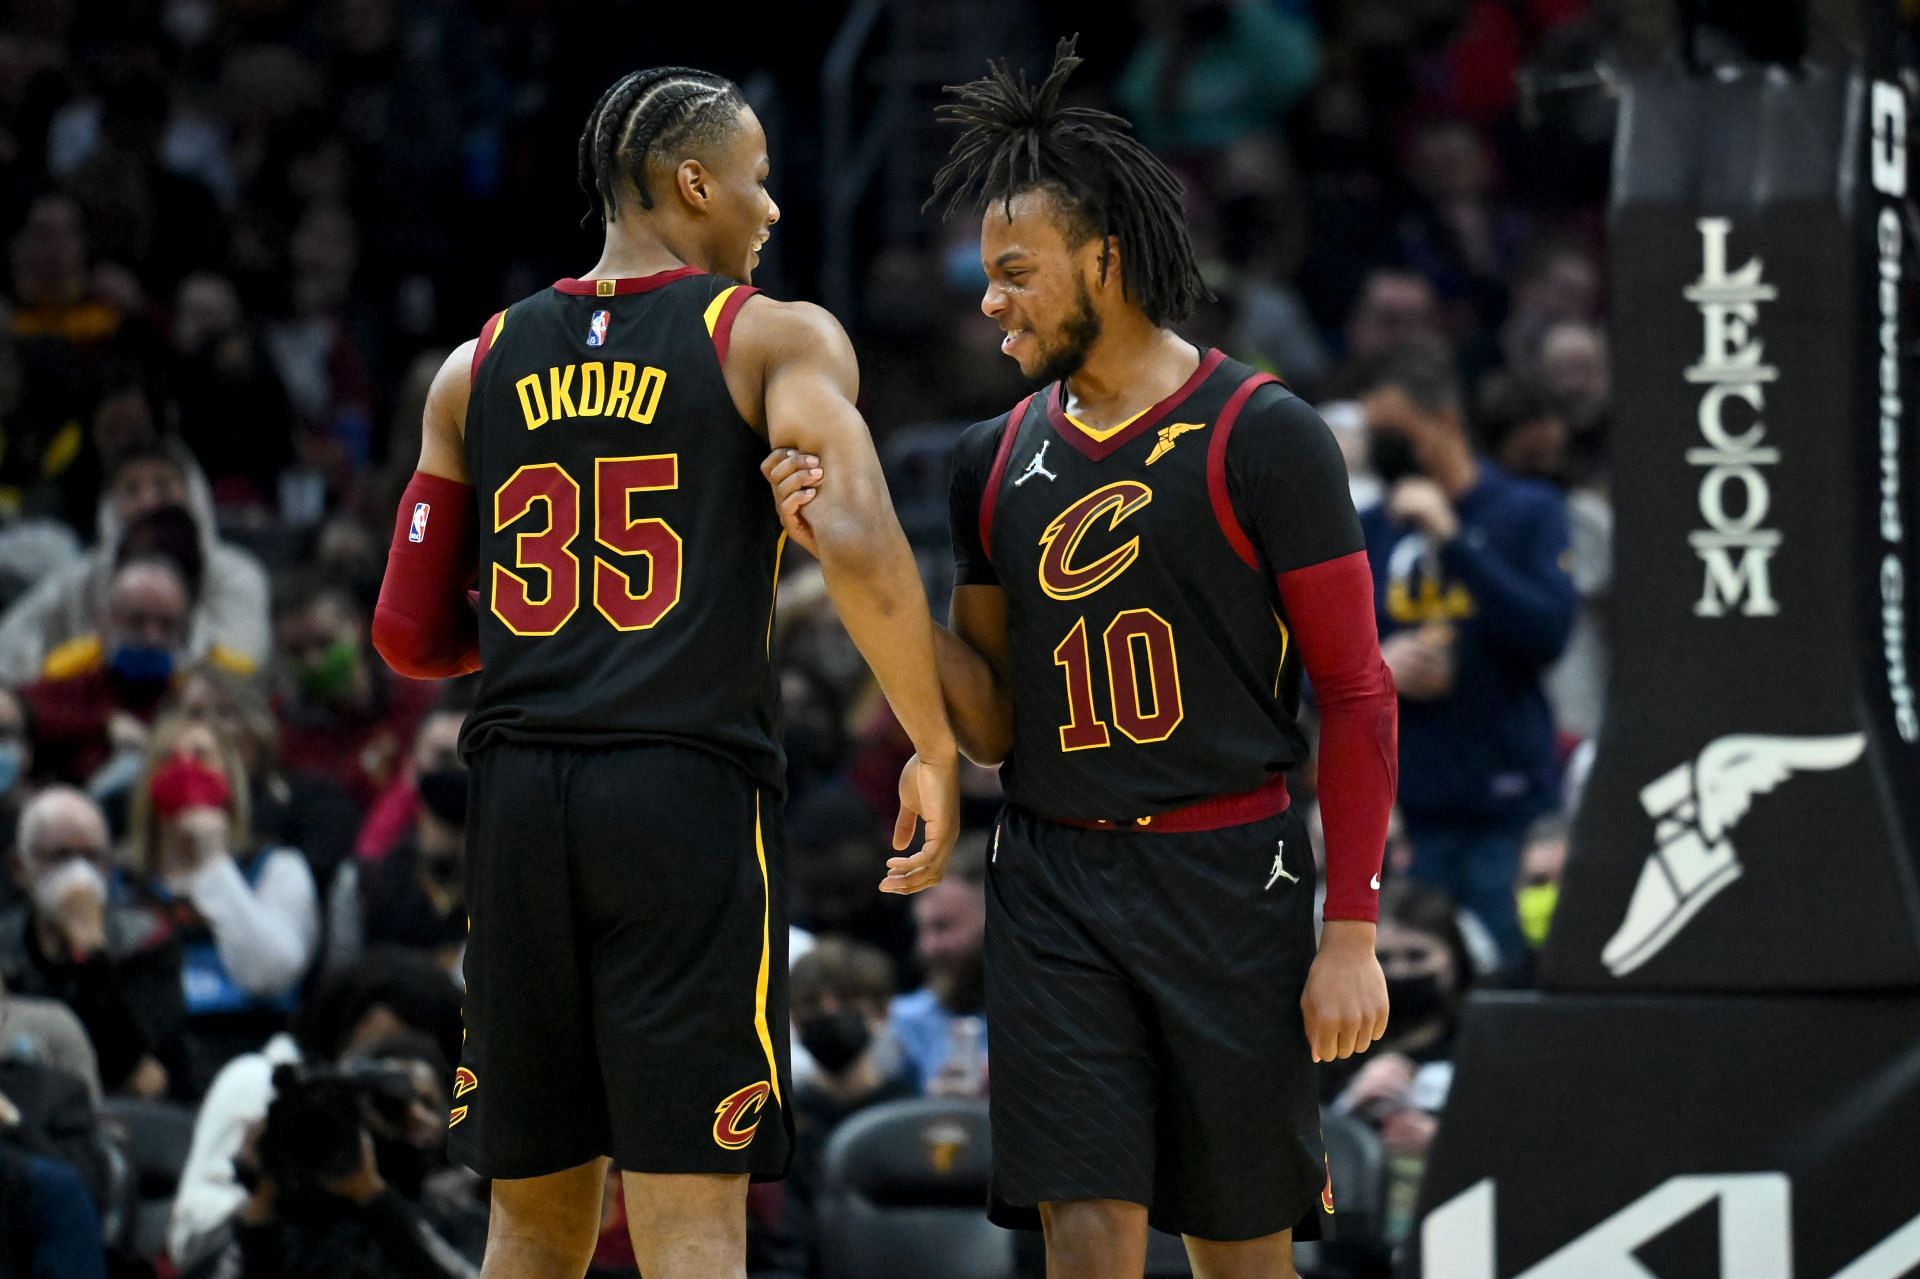 Isaac Okoro and Darius Garland (10) of the Cleveland Cavaliers celebrate after Okoro scored against the OKC Thunder at Rocket Mortgage Fieldhouse on Jan. 22 in Cleveland, Ohio.